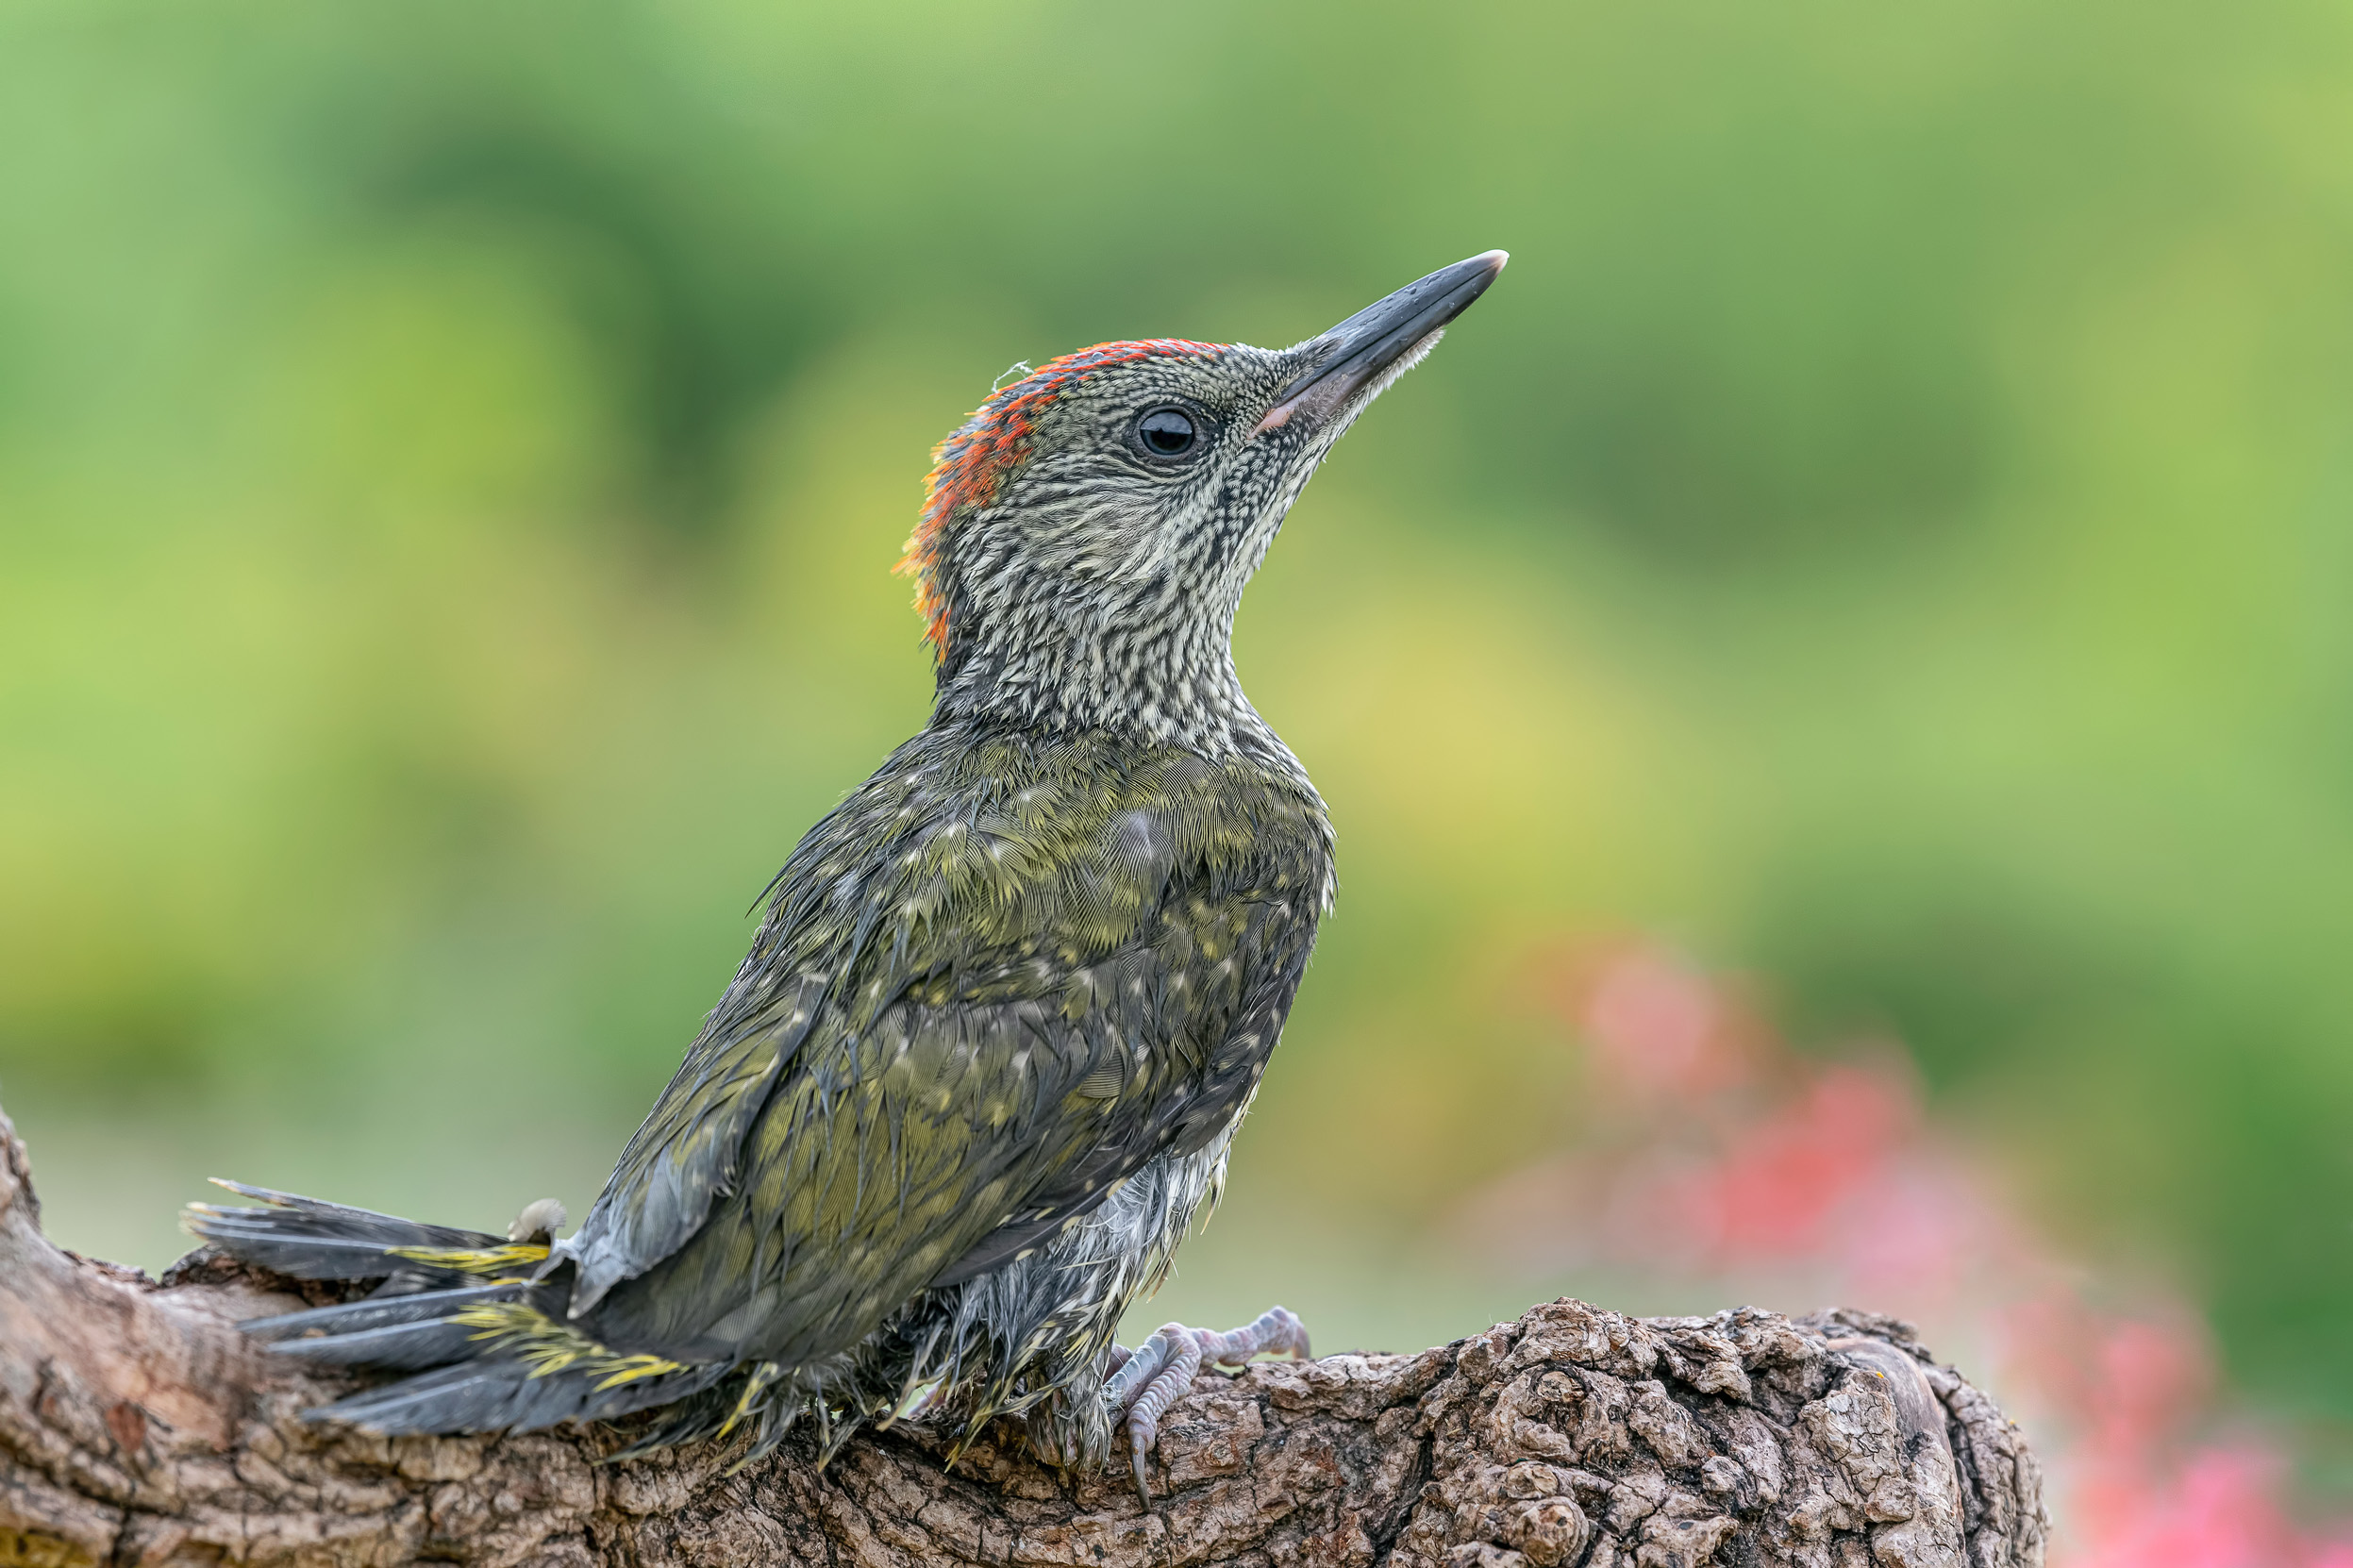 A lone juvenile Green Woodpecker perched on a log.